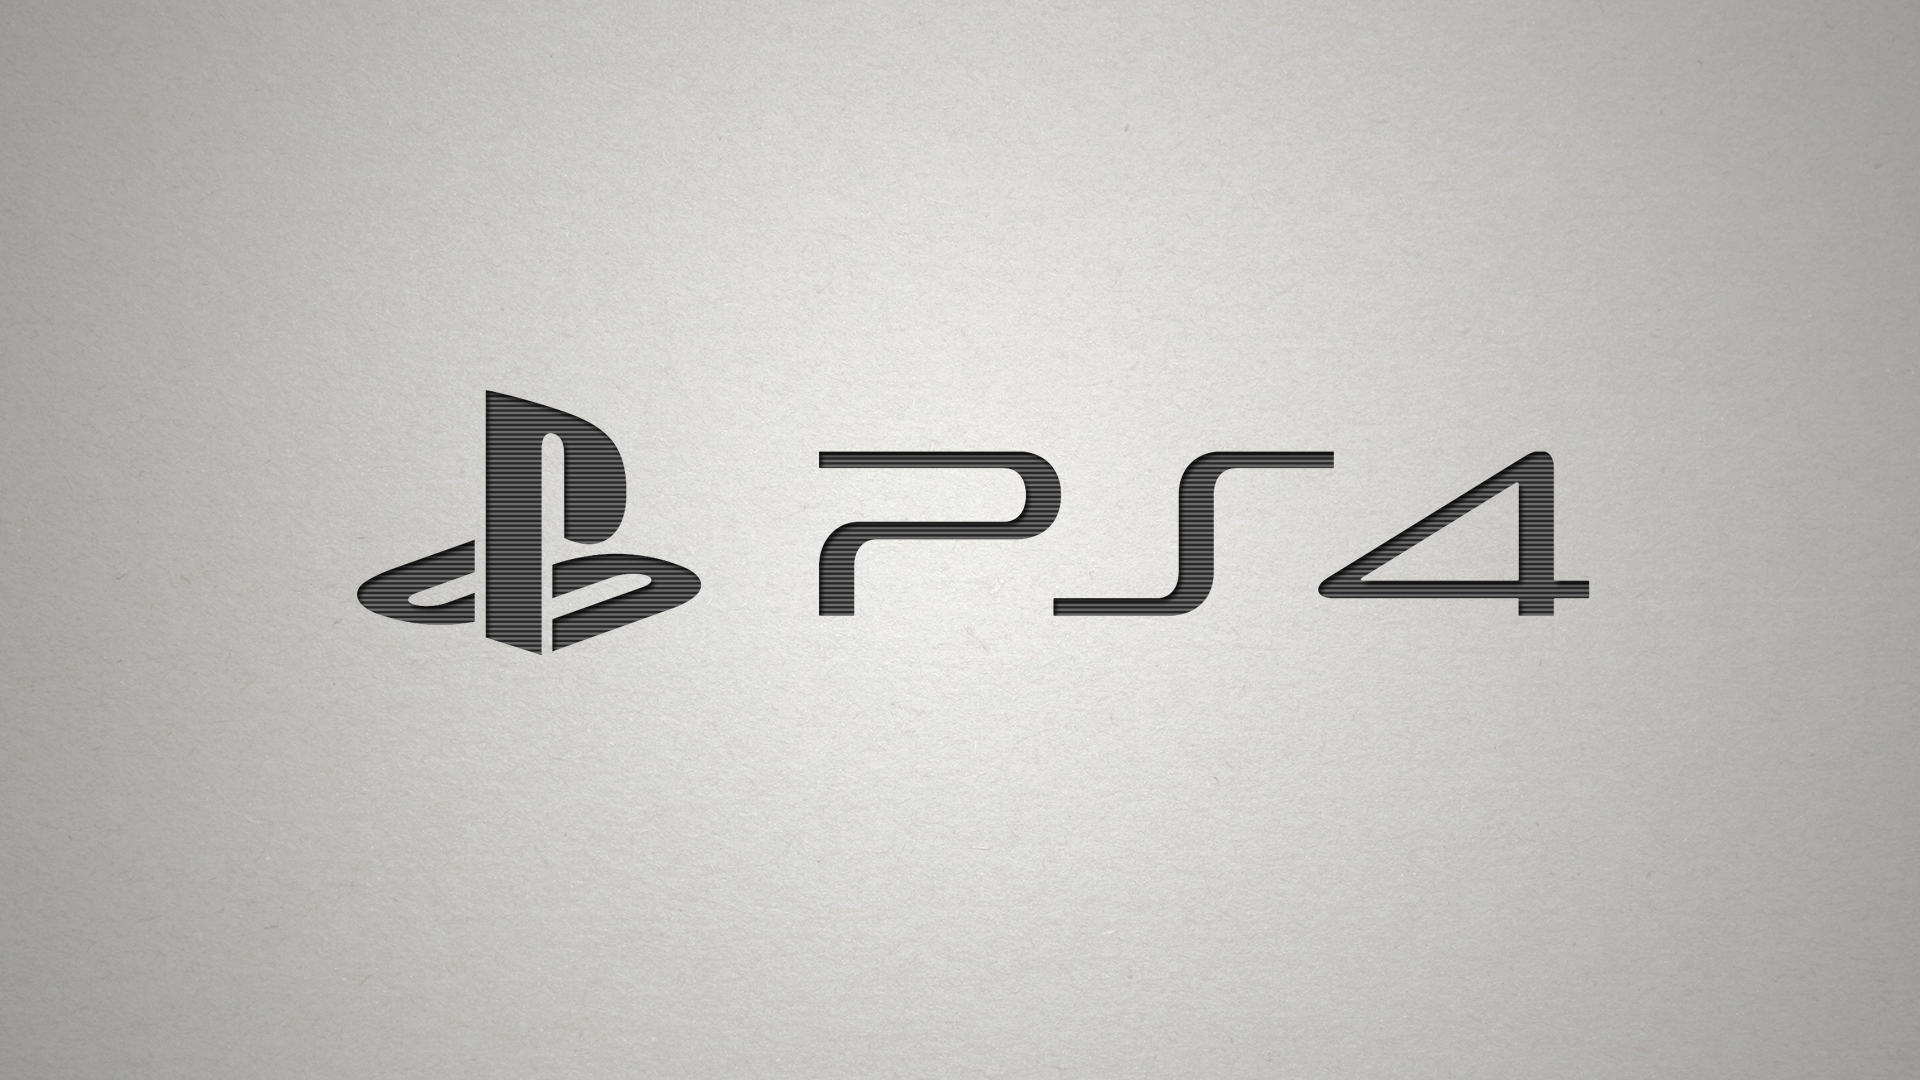 Video Game Playstation 4 HD Wallpaper | Background Image